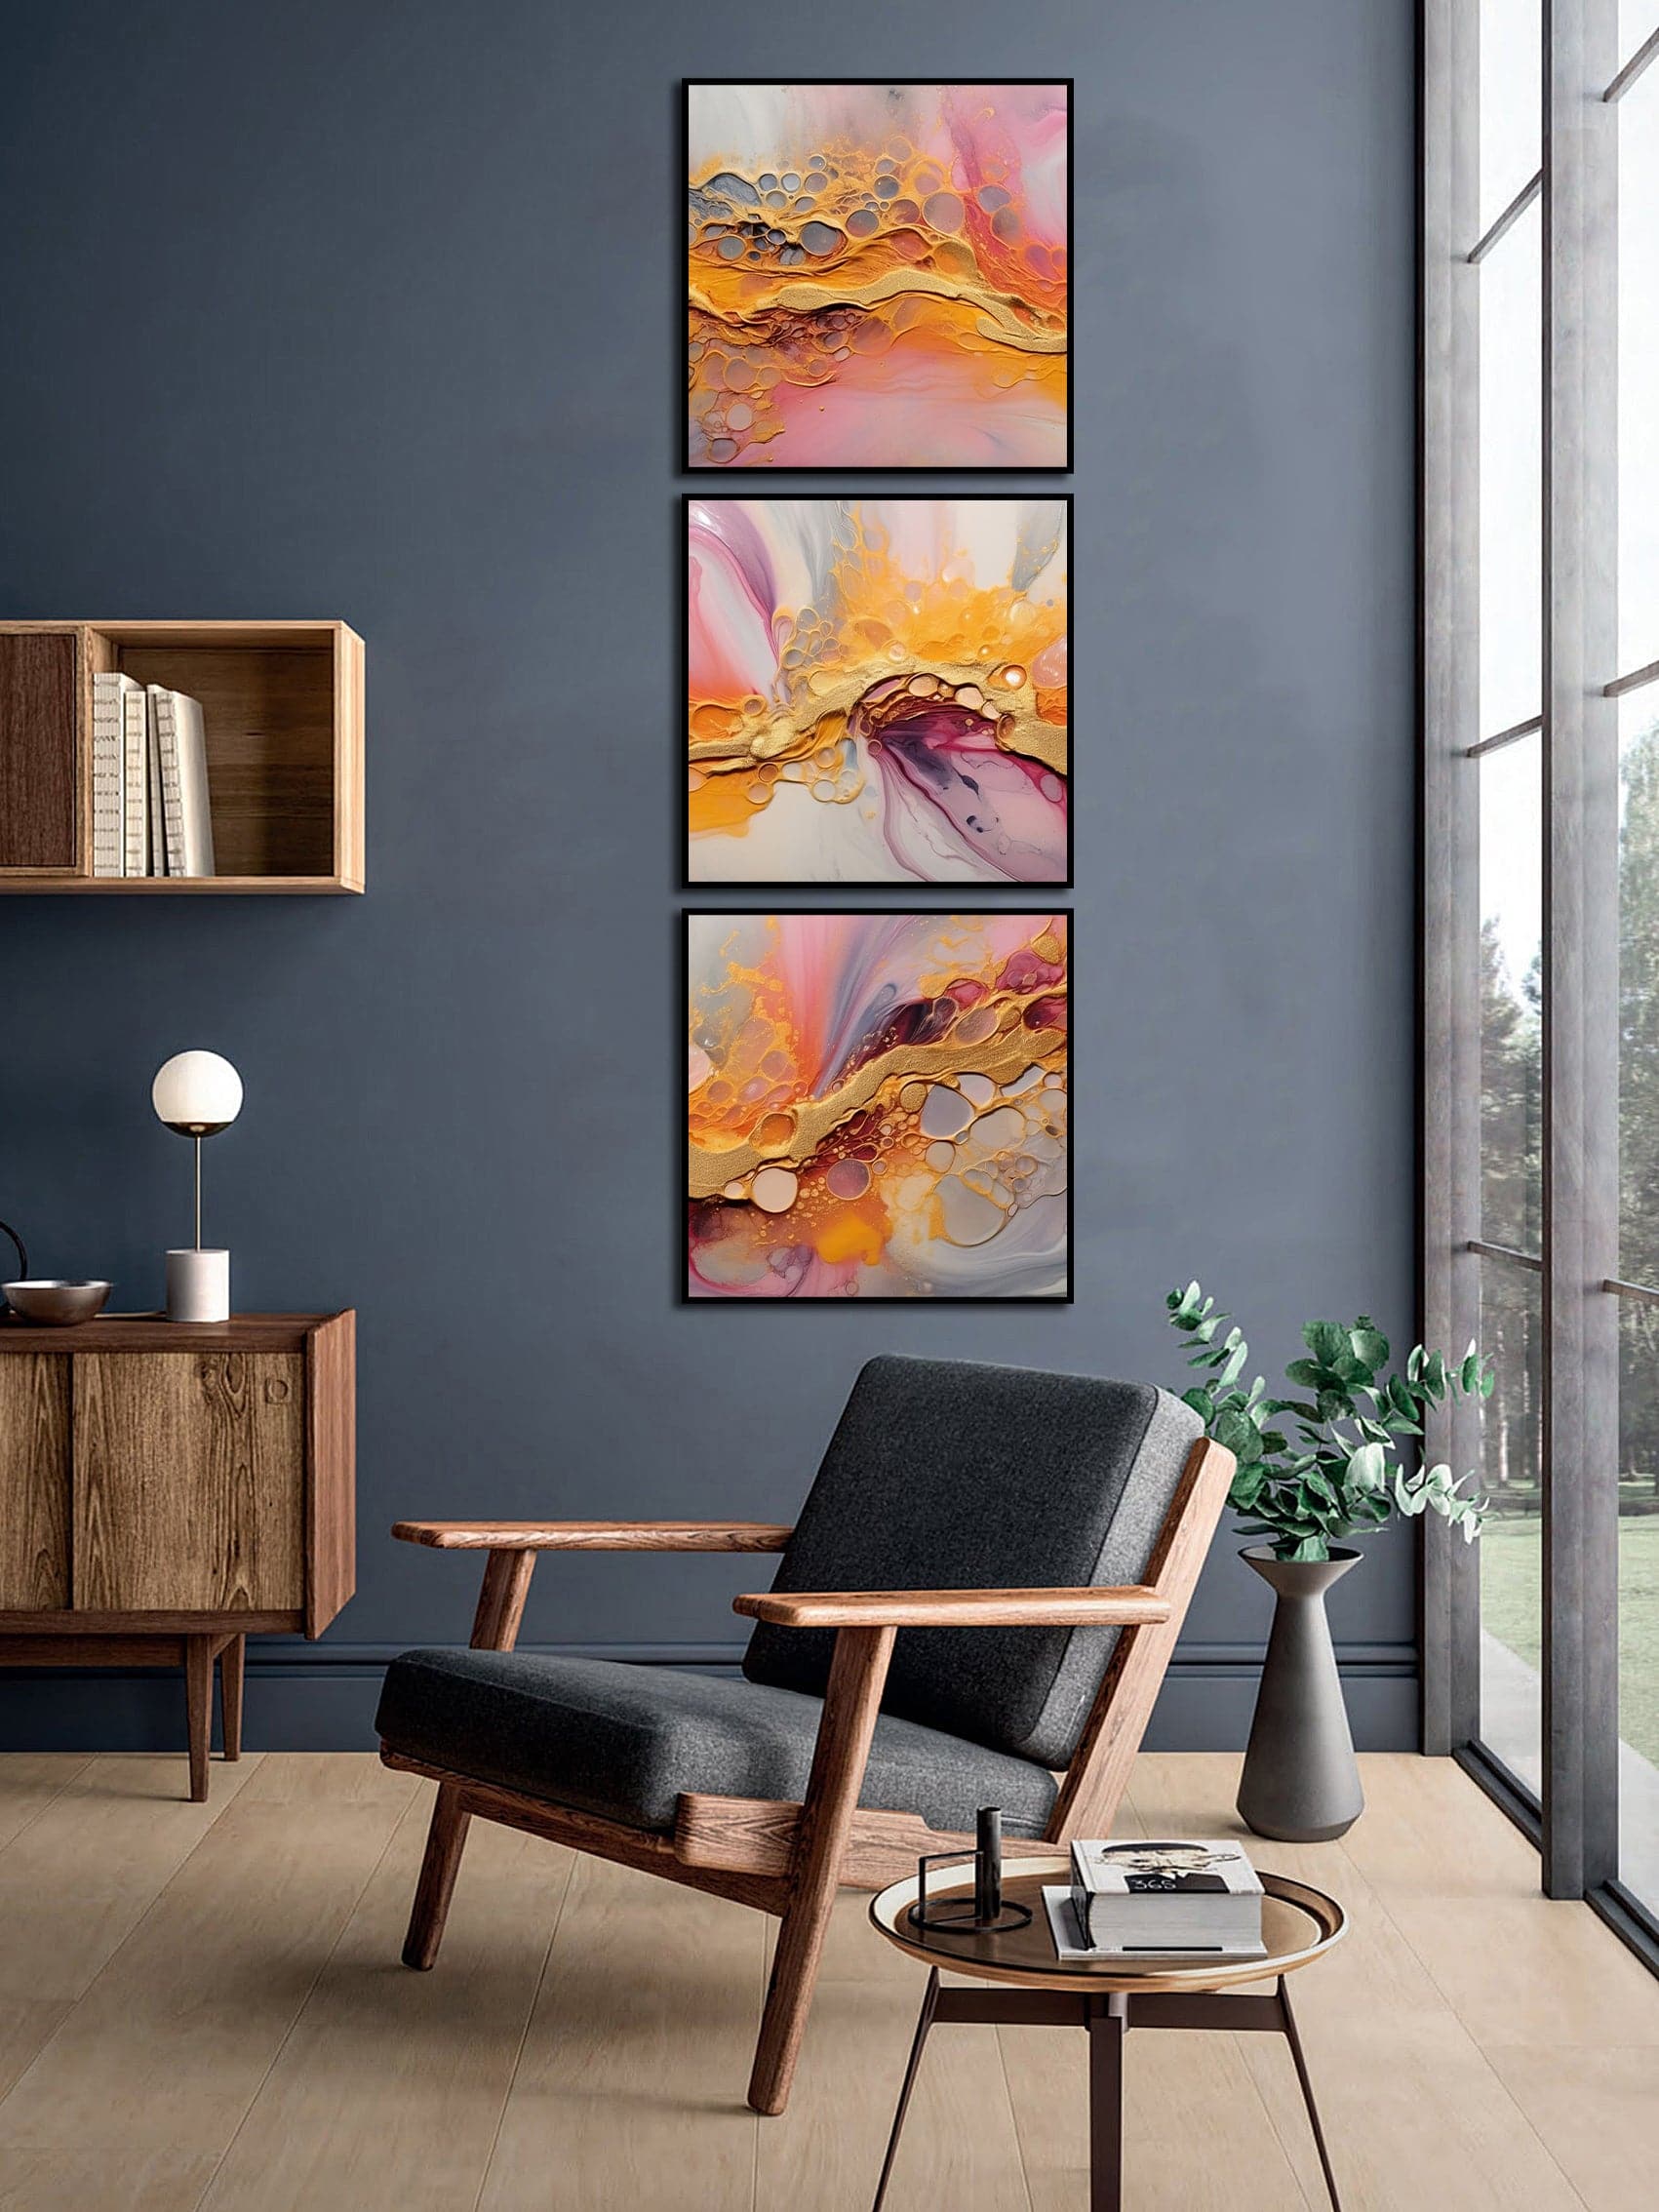 Framed 3 Panels - Natural Luxury Abstract Fluid